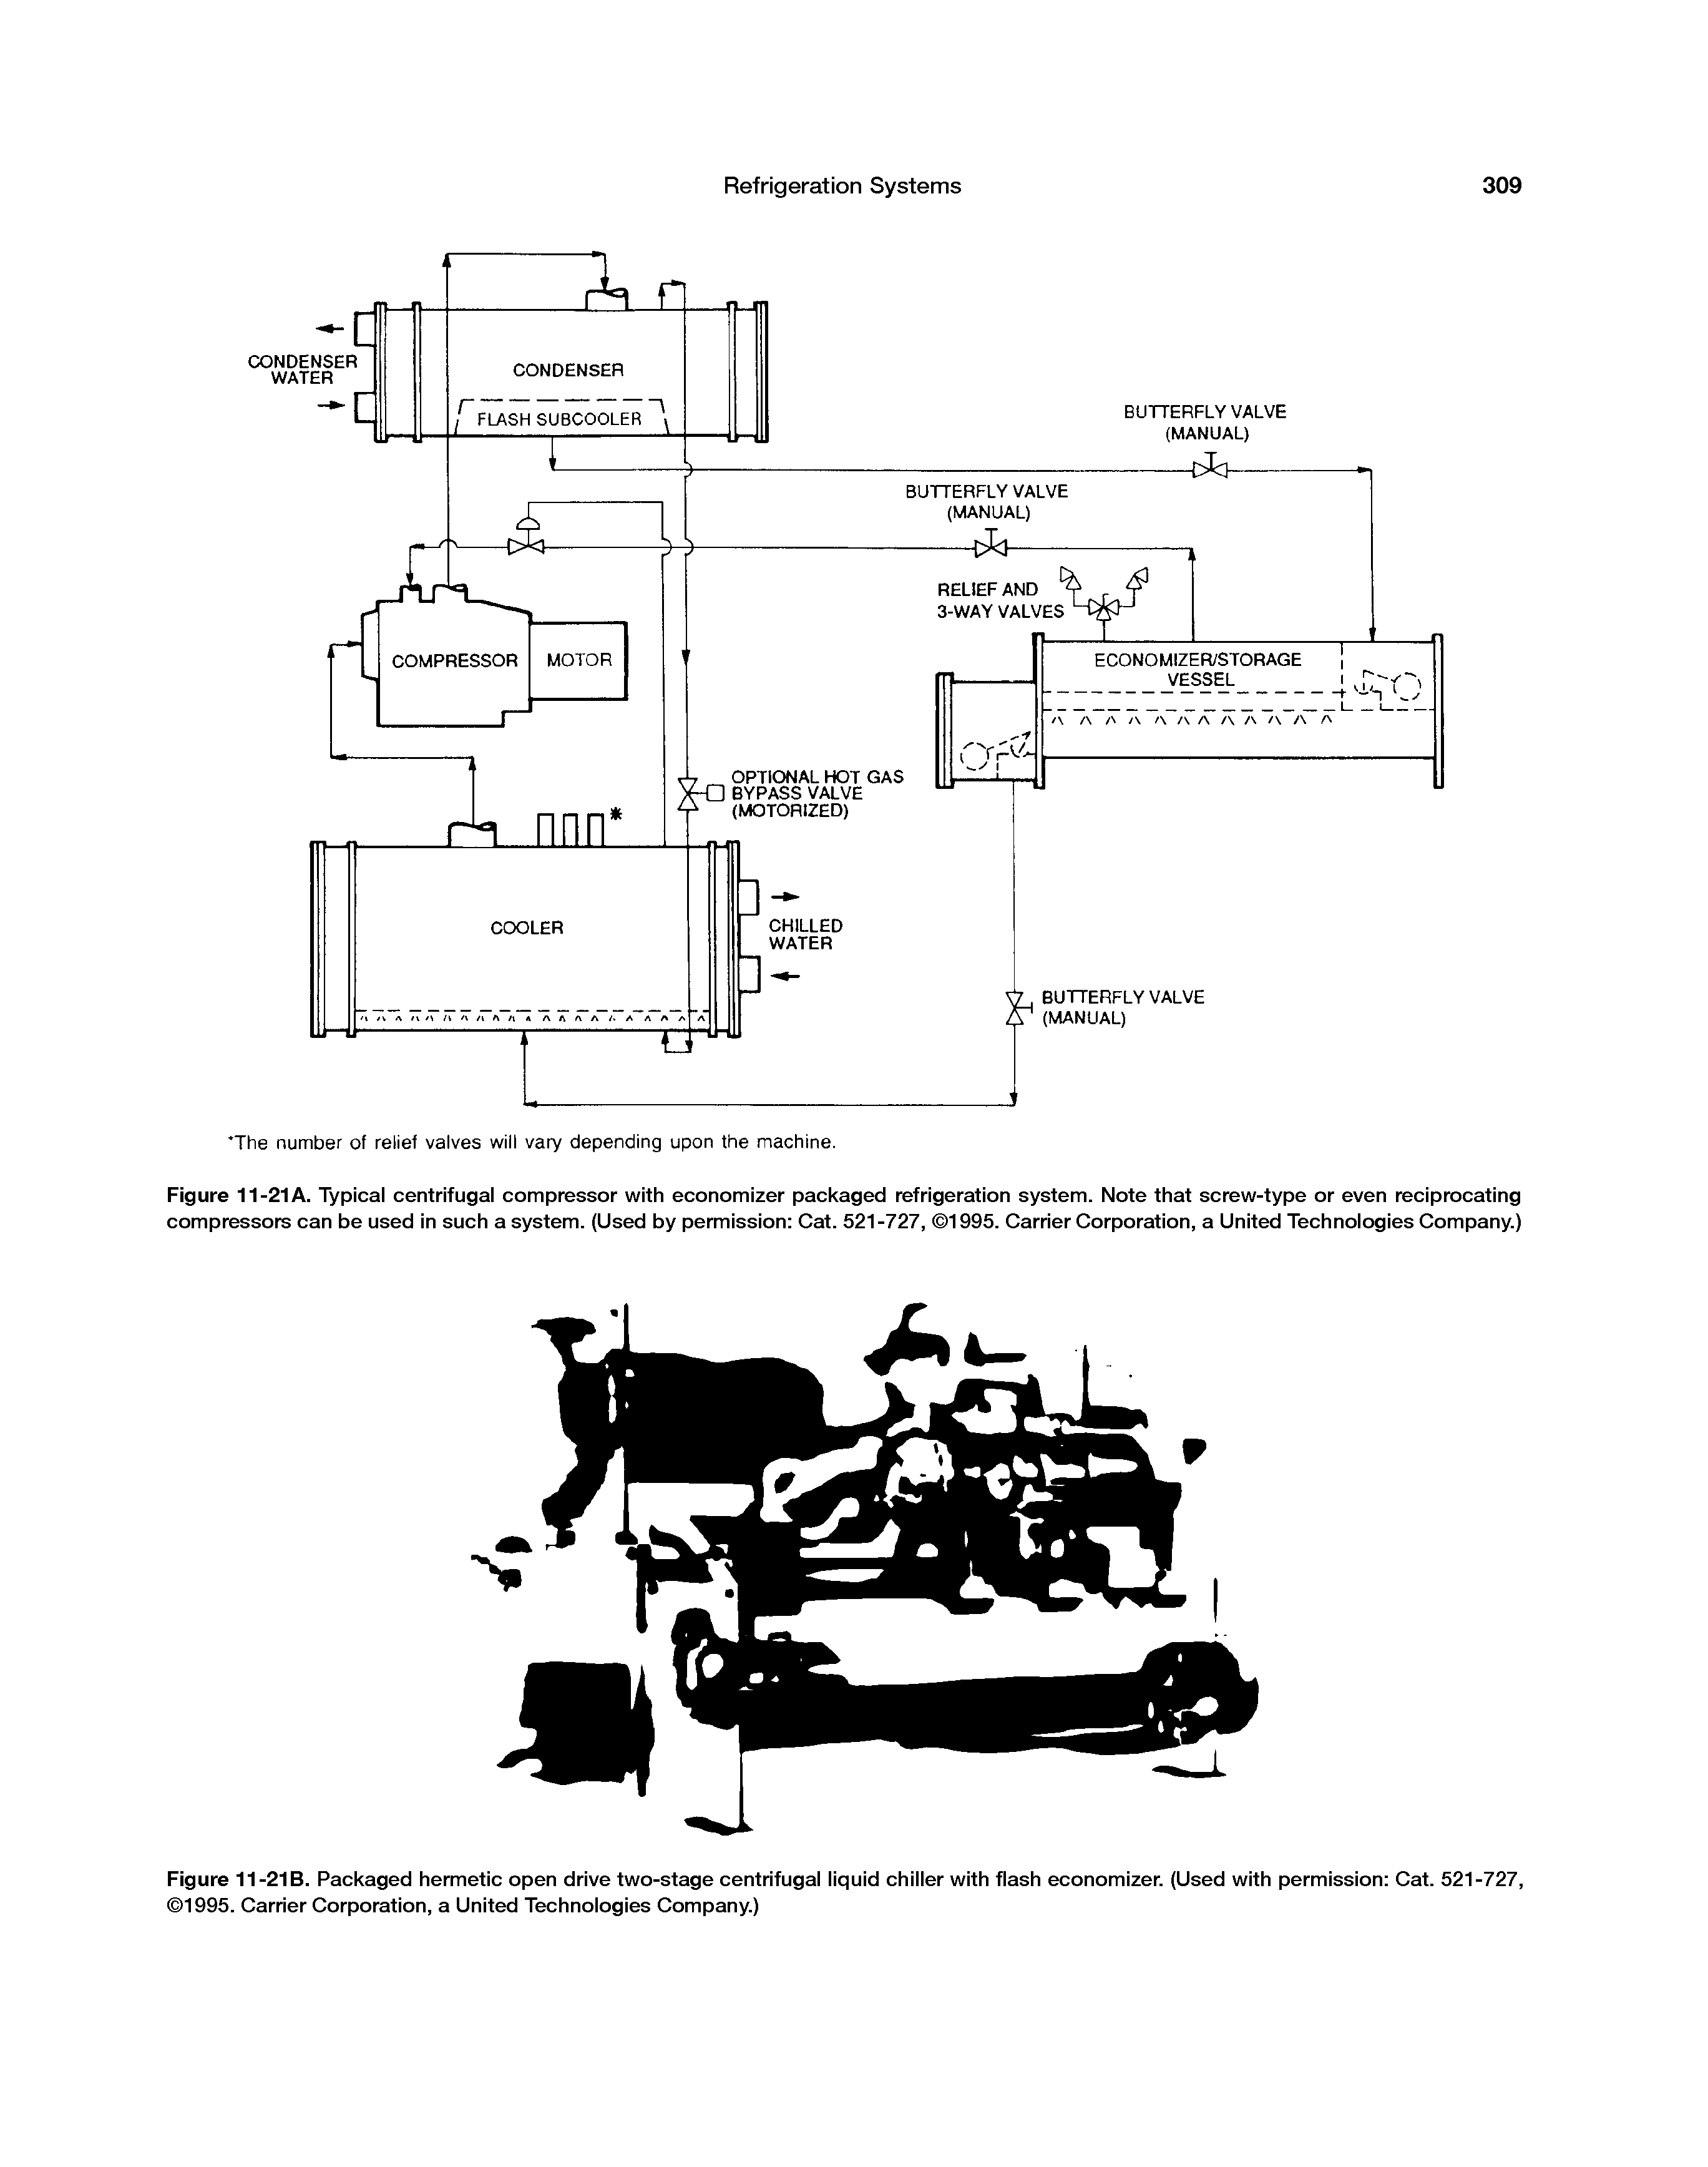 Figure 11-21A. Typical centrifugal compressor with economizer packaged refrigeration system. Note that screw-type or even reciprocating compressors can be used in such a system. (Used by permission Cat. 521-727, 1995. Carrier Corporation, a United Technologies Company.)...